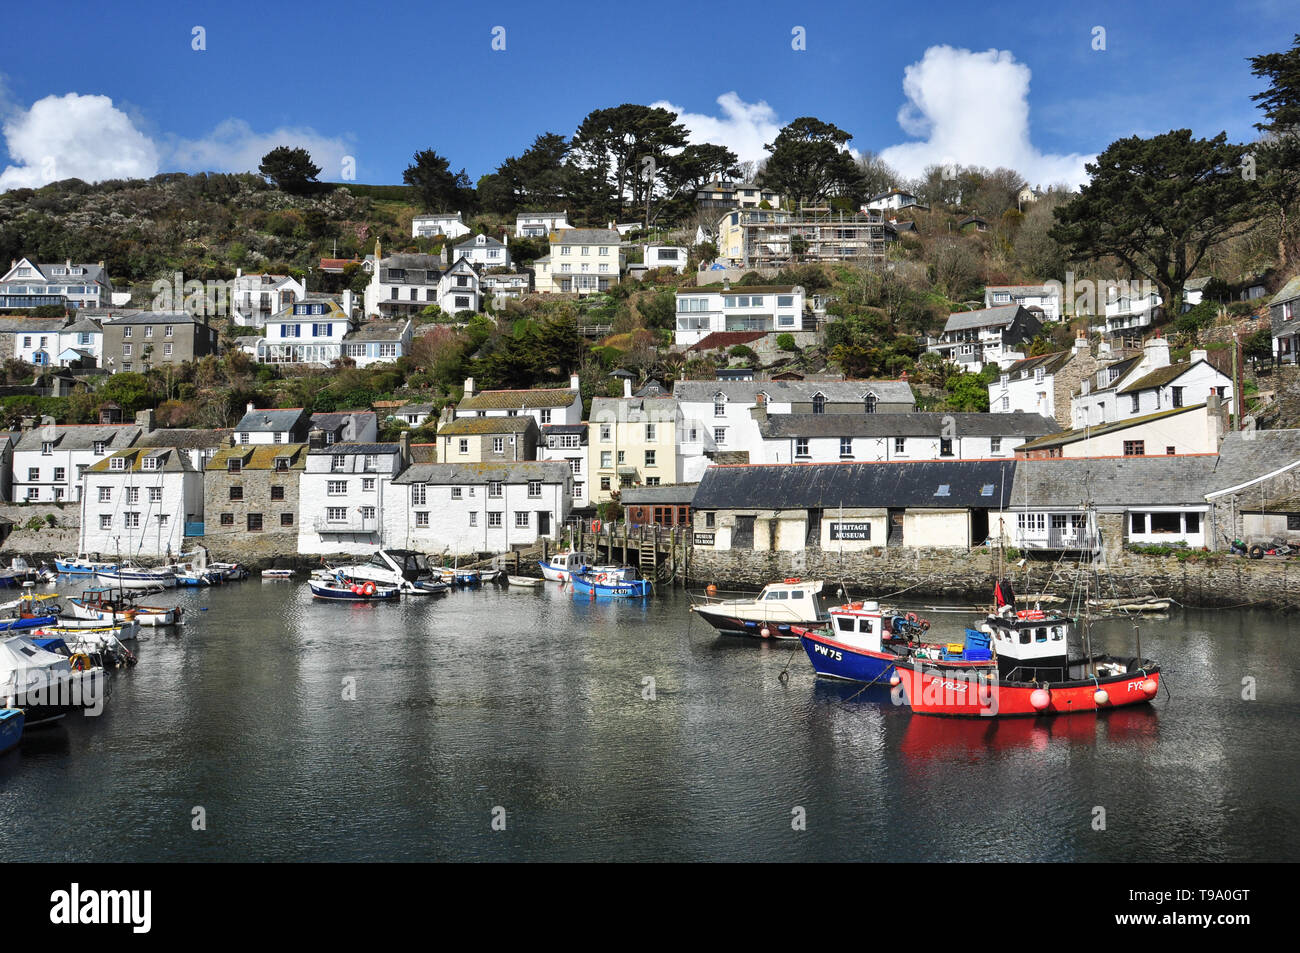 Boats in the small harbour at Polperro, Cornwall, England, UK Stock Photo